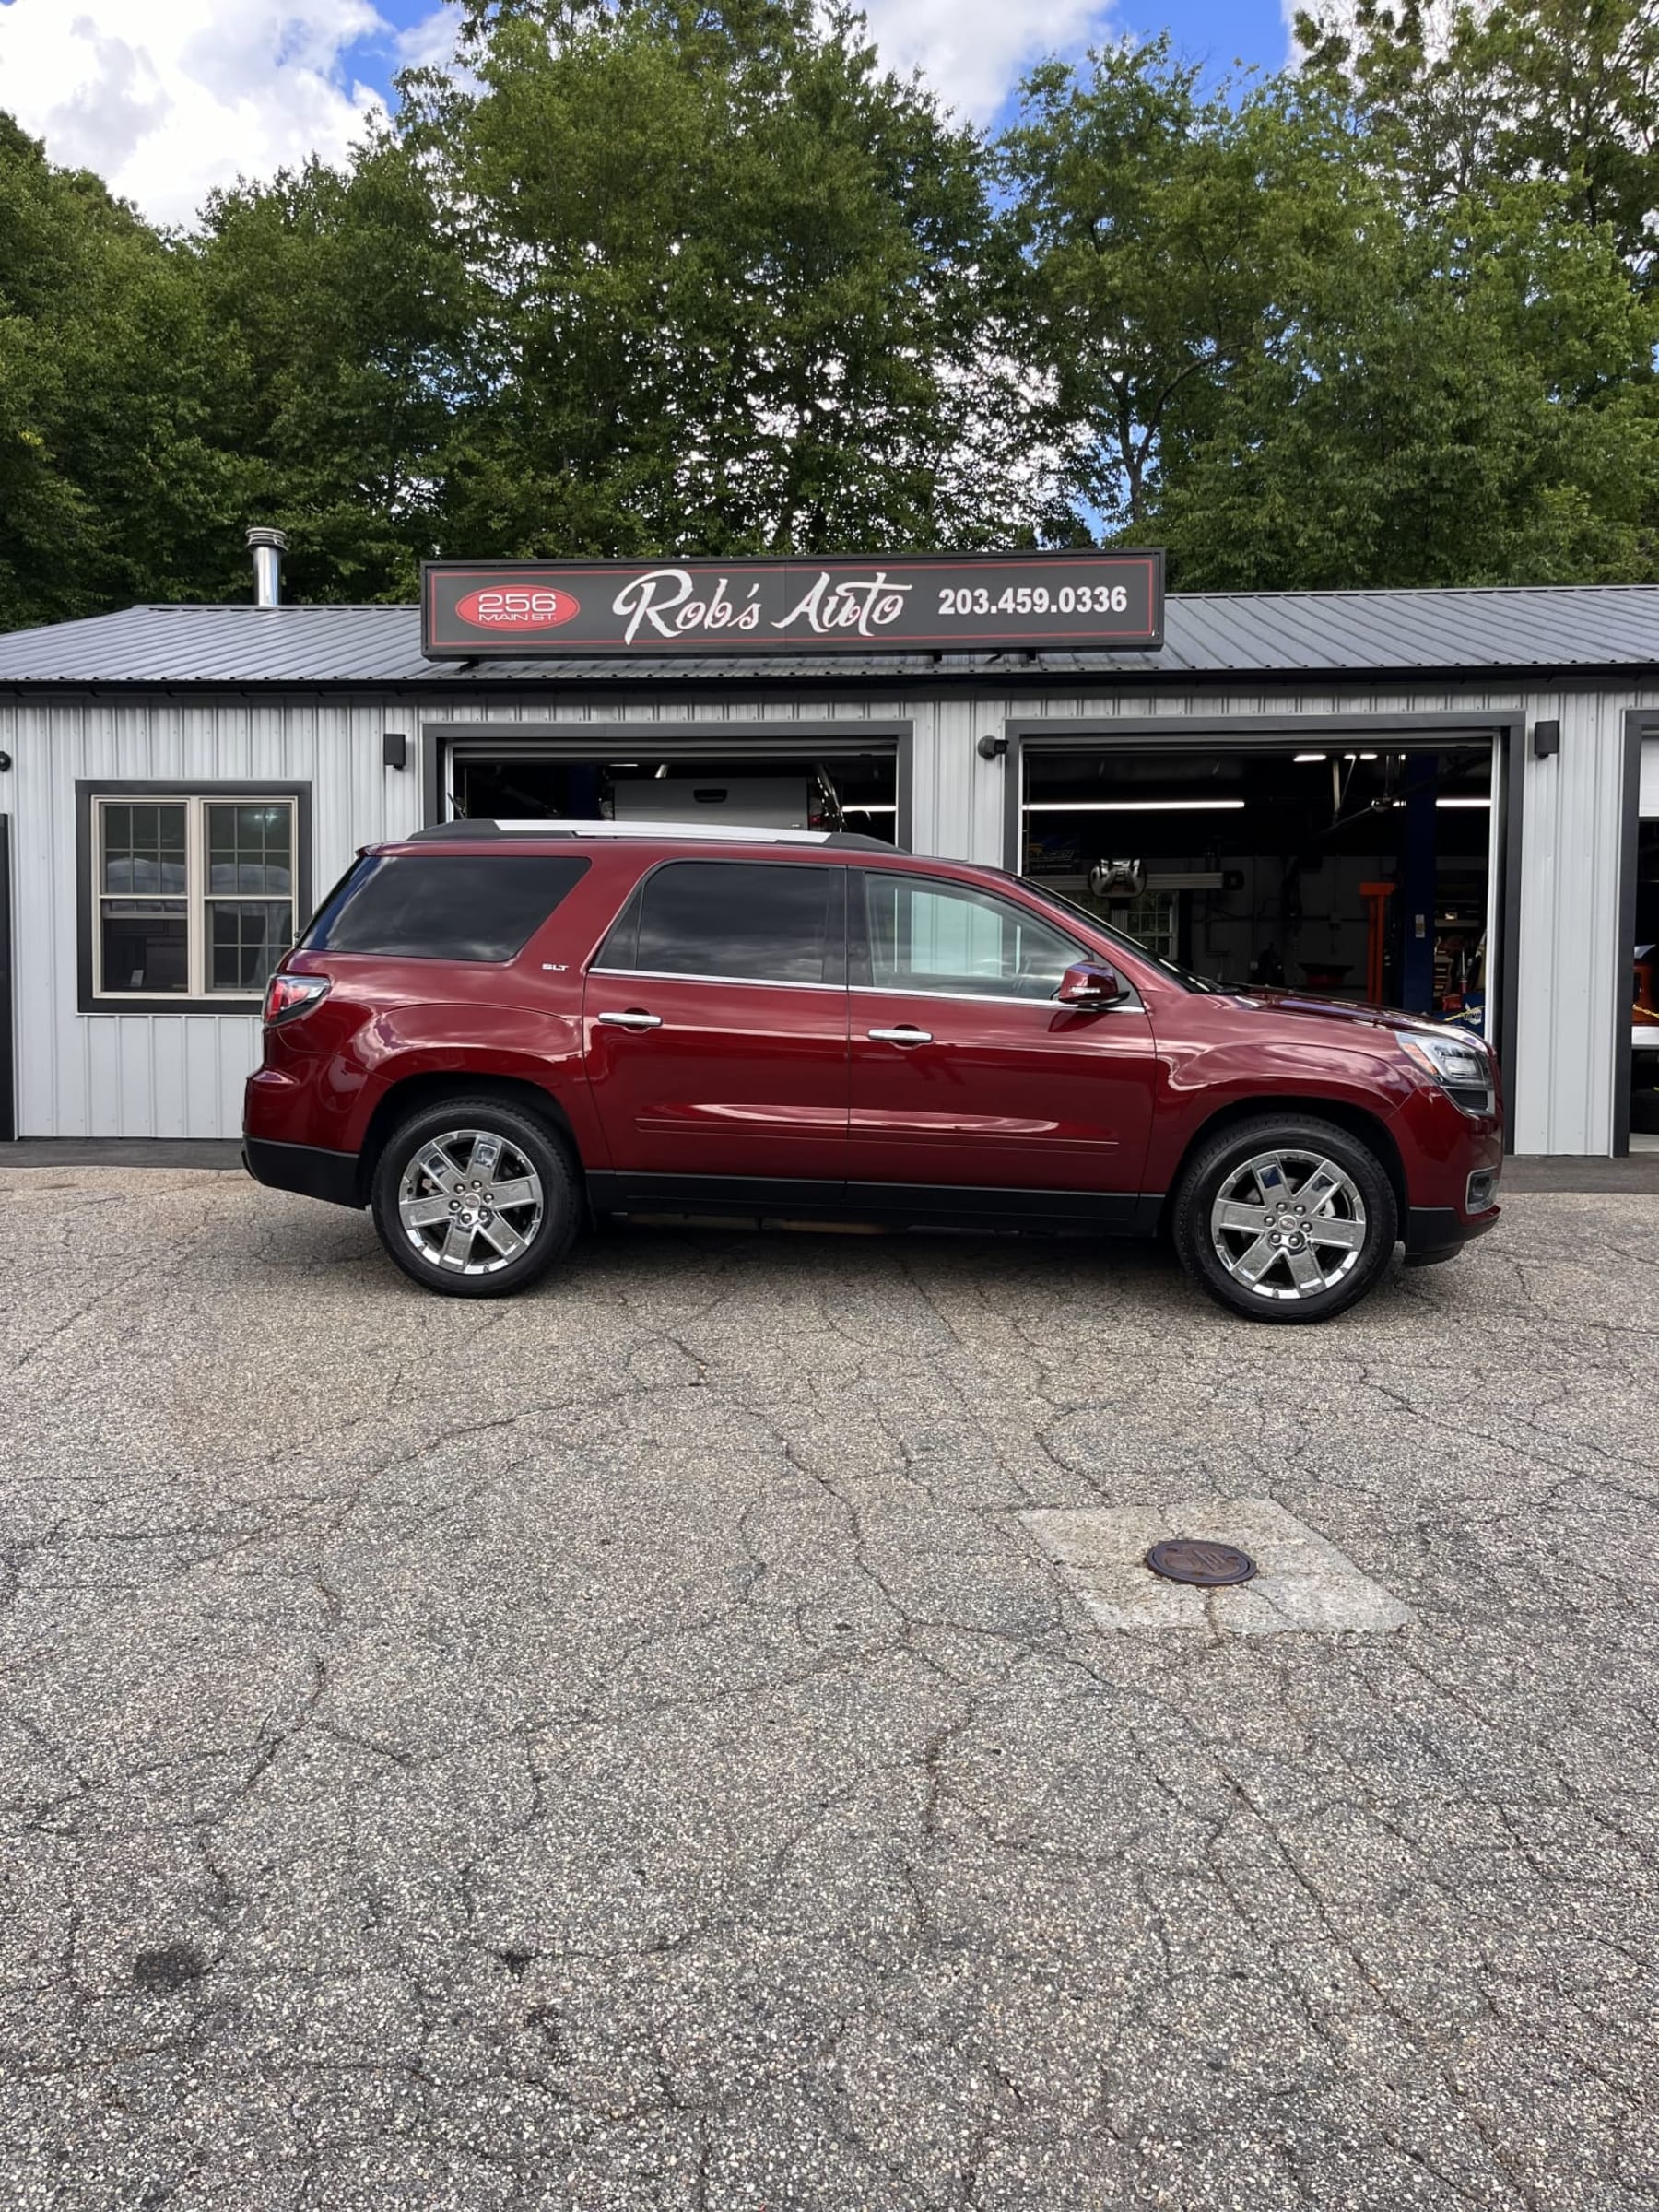 NEW ARRIVAL!! One owner 2017 GMC Acadia Limited! ONLY 77k miles! AWD!! Loaded with navigation, dual panel moonroof, heated leather seats, heated steering wheel, 2nd row captain chairs, third row, 20” wheels, remote start, heads up display and much much more!! Will not last at only $18,900!!